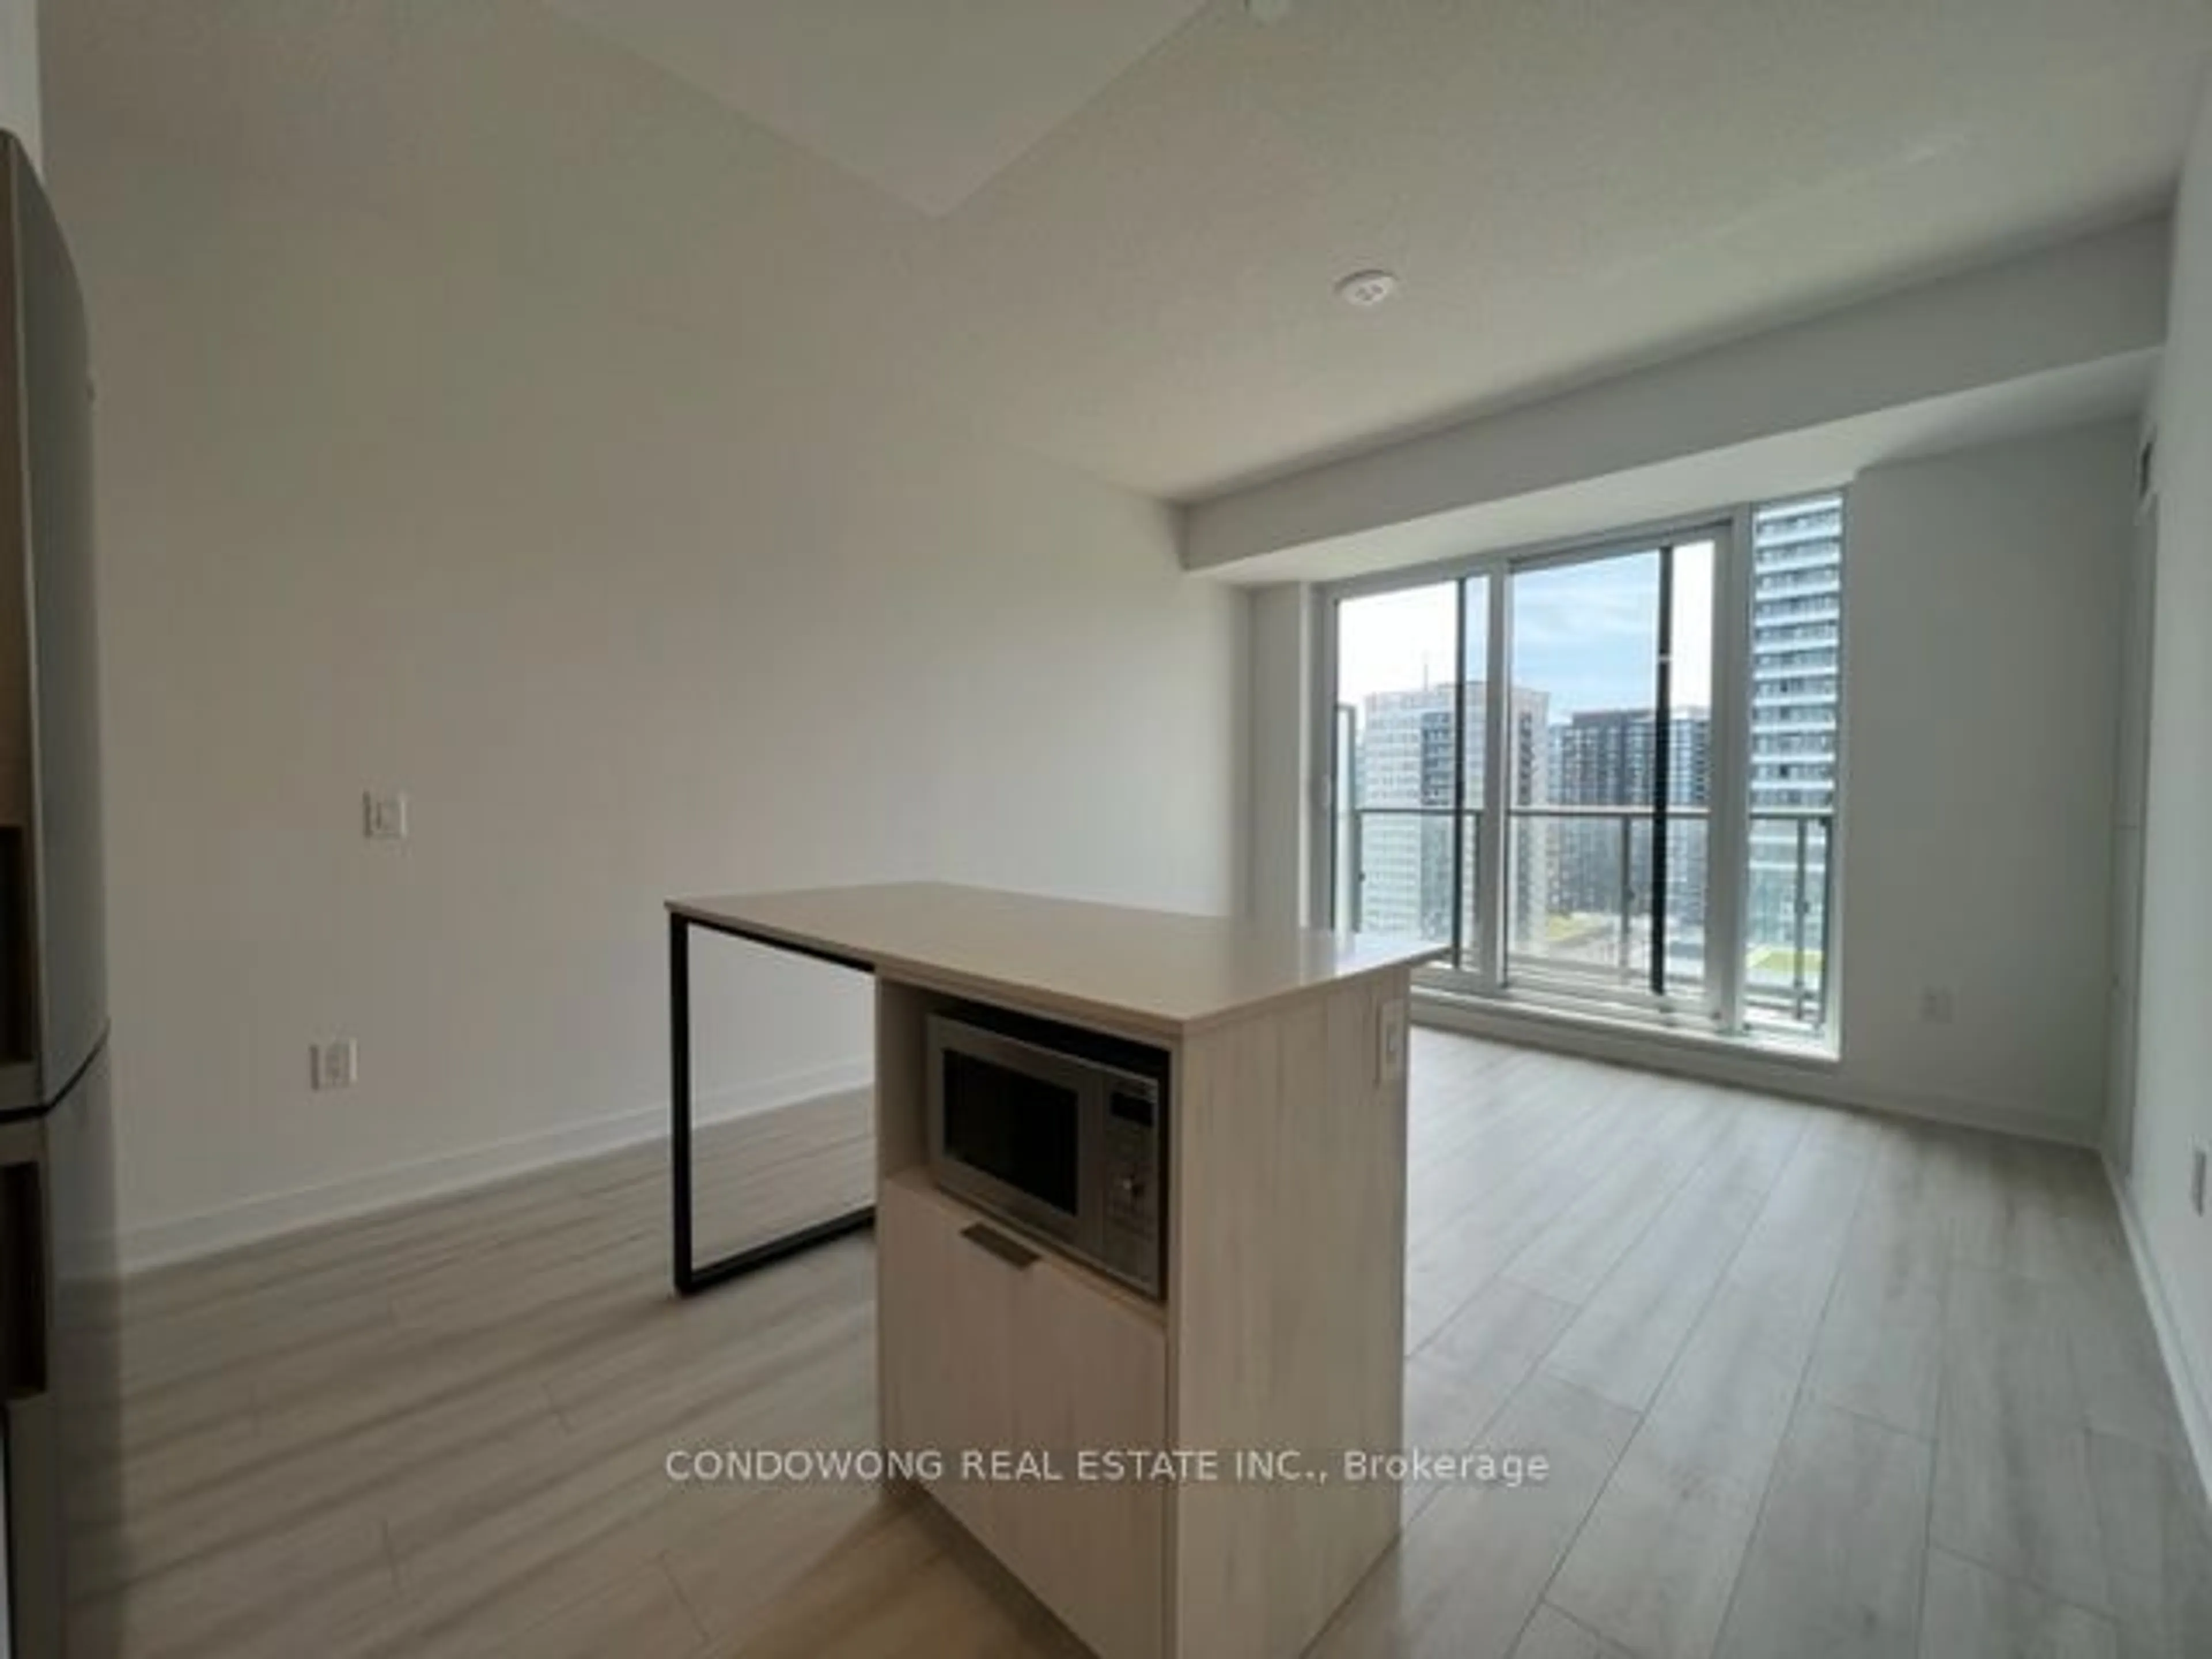 A pic of a room for 130 River St #1807, Toronto Ontario M5A 0R8